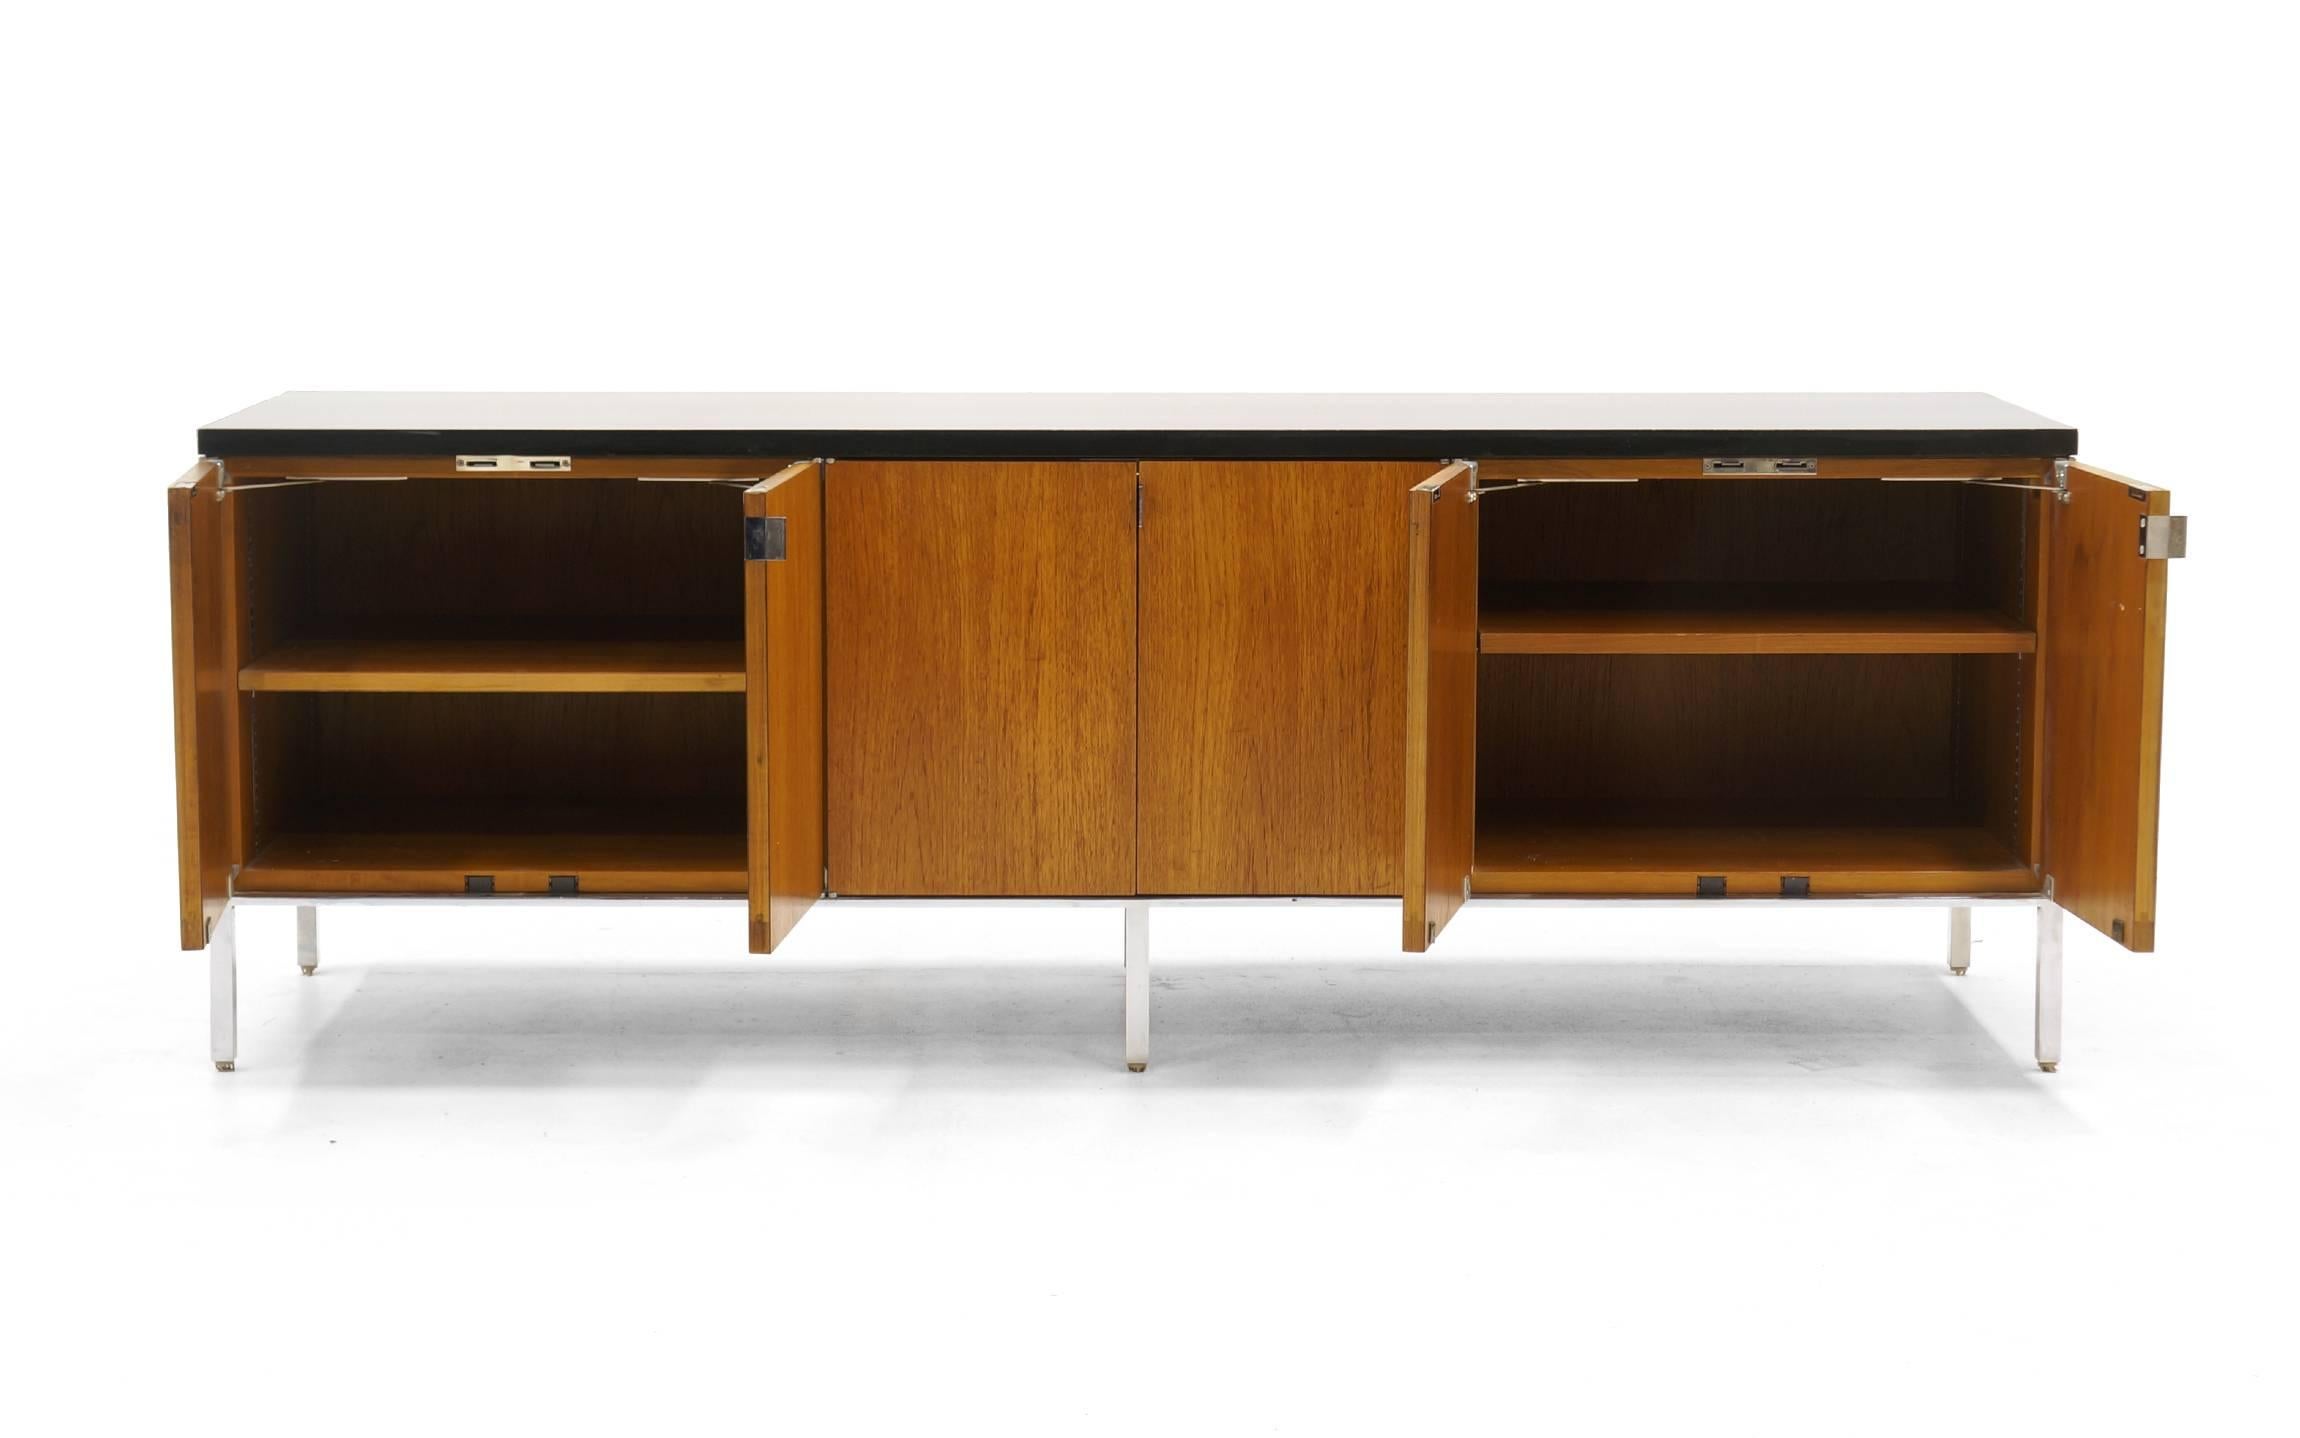 Florence Knoll credenza or media cabinet. Very versatile storage cabinet. The low height and the wide openings are ideal for components and a television on top. The original owner customer built an insert in the center section for vinyl albums. The